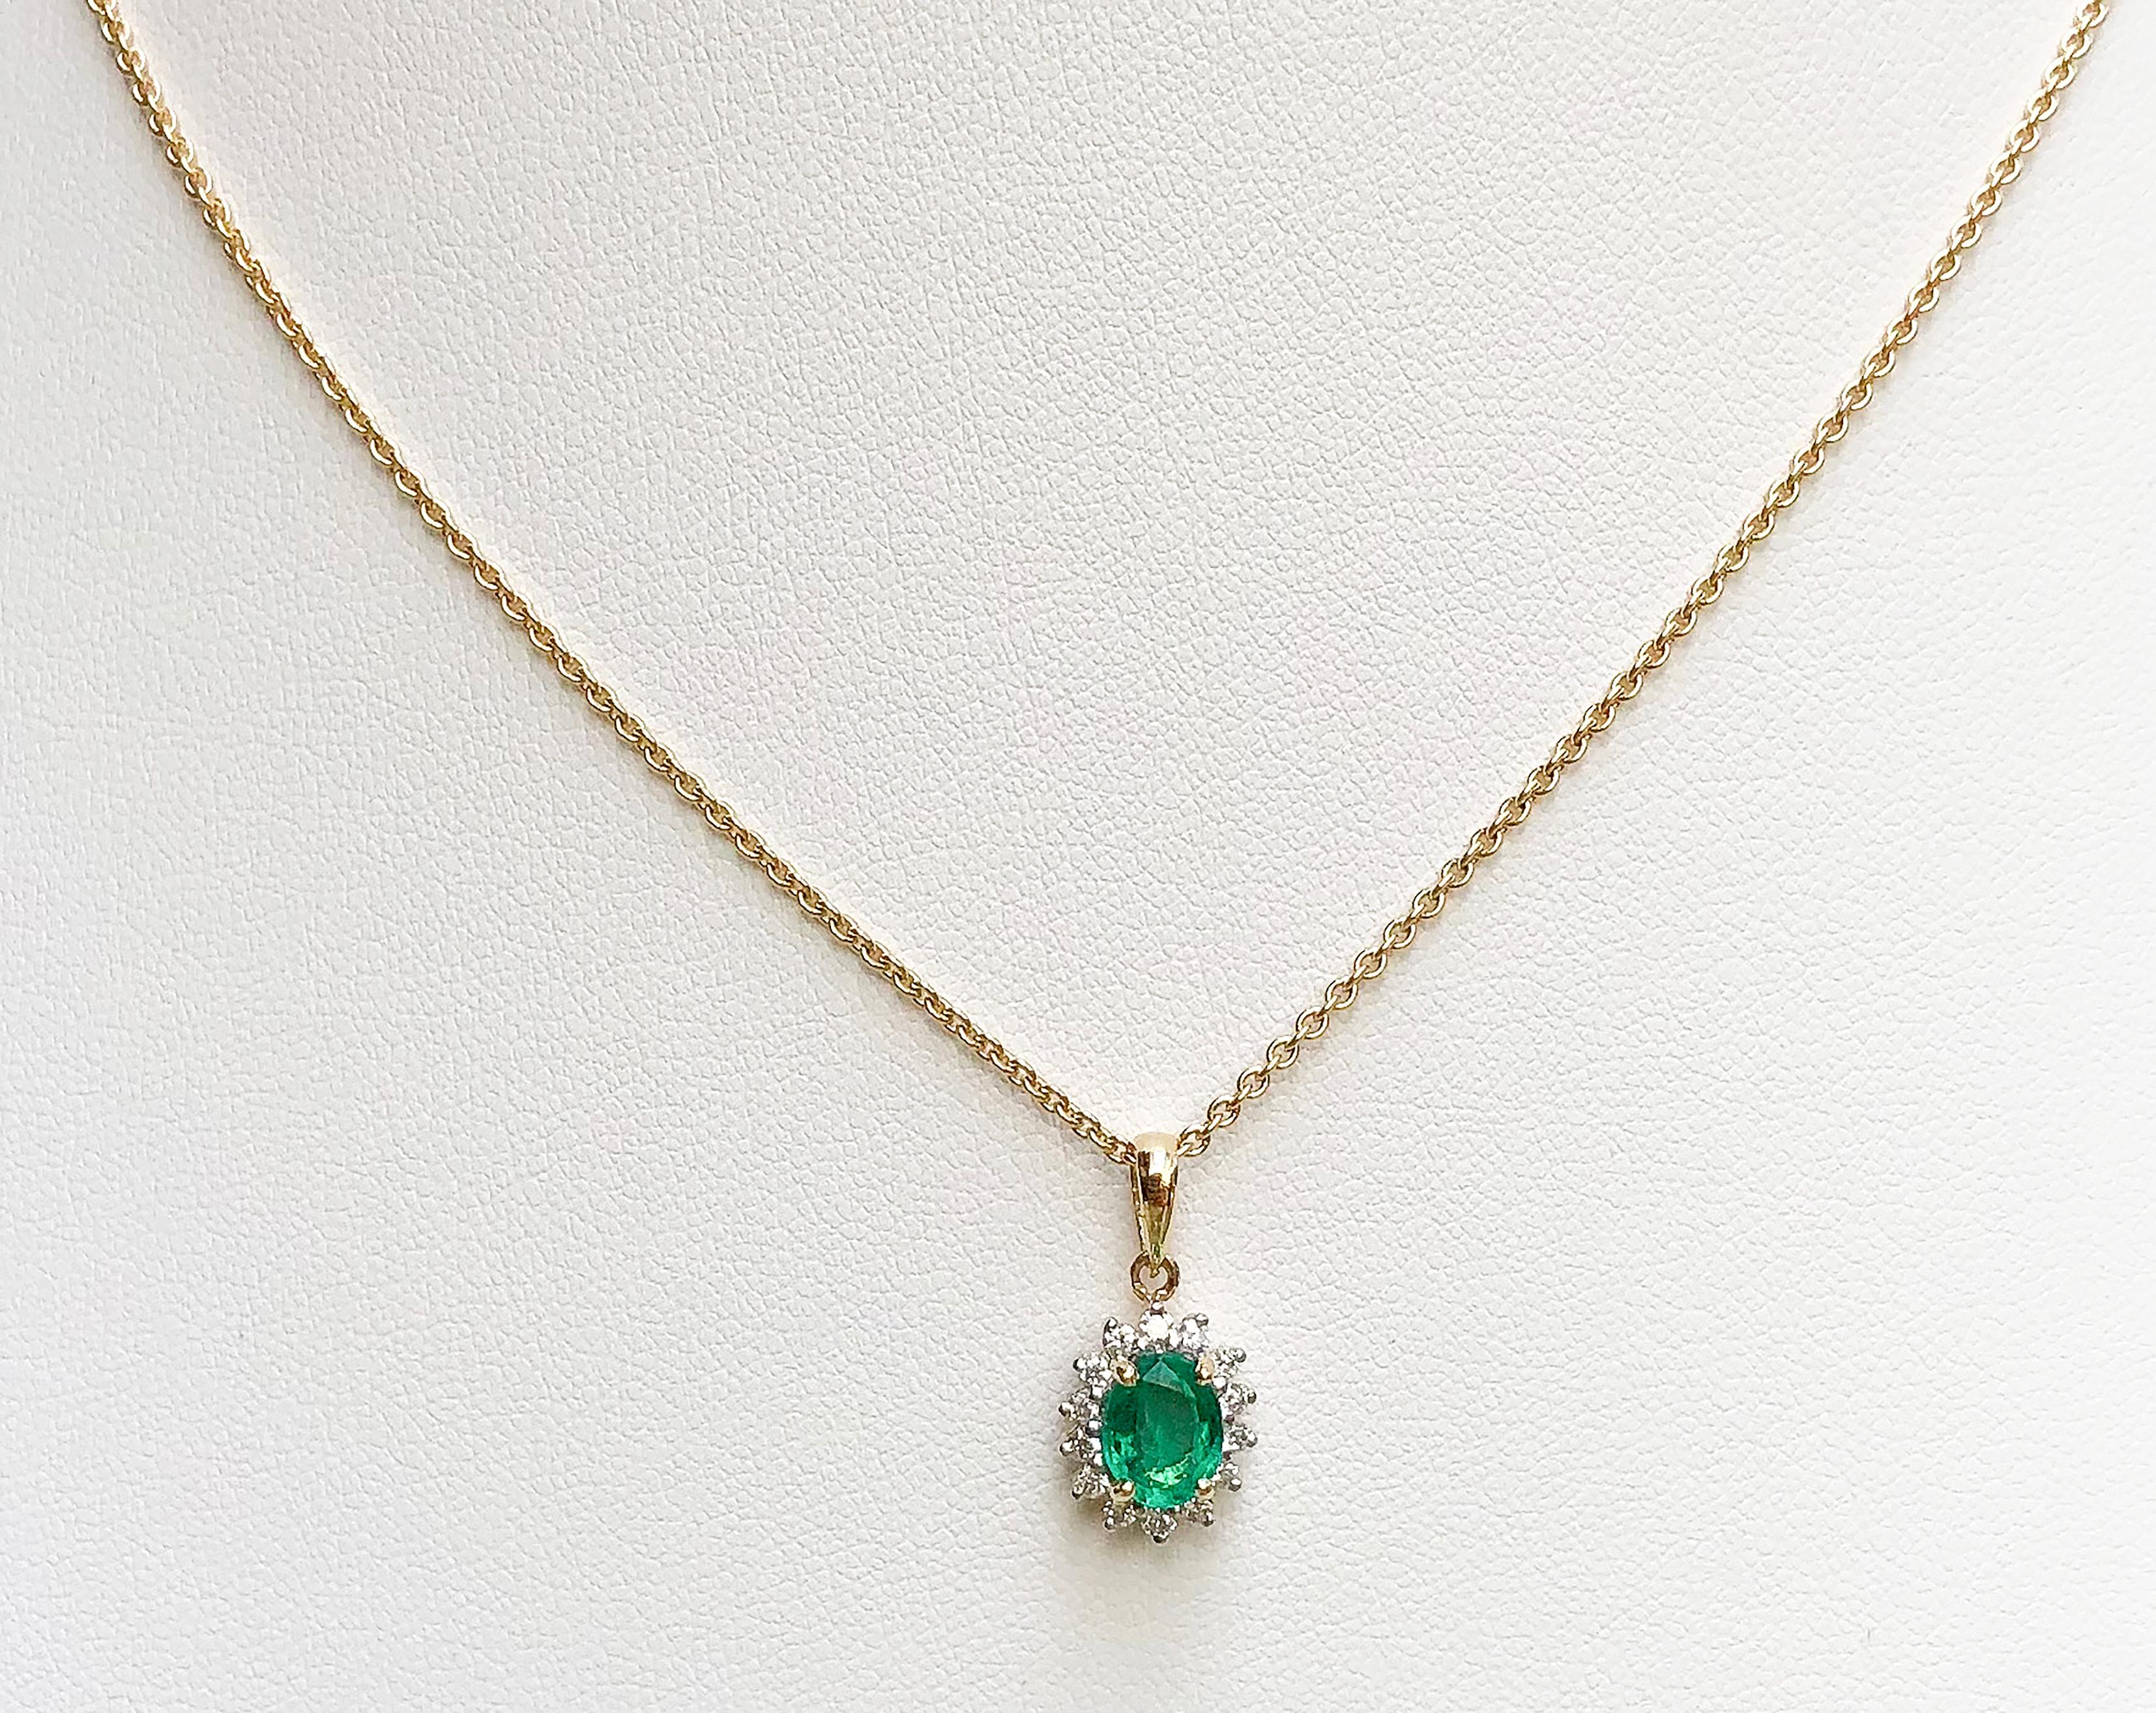 Emerald 0.87 carat with Diamond 0.21 carat Pendant set in 18 Karat Gold Settings
(chain not included)

Width:  0.9 cm 
Length: 1.8 cm
Total Weight: 1.91 grams

